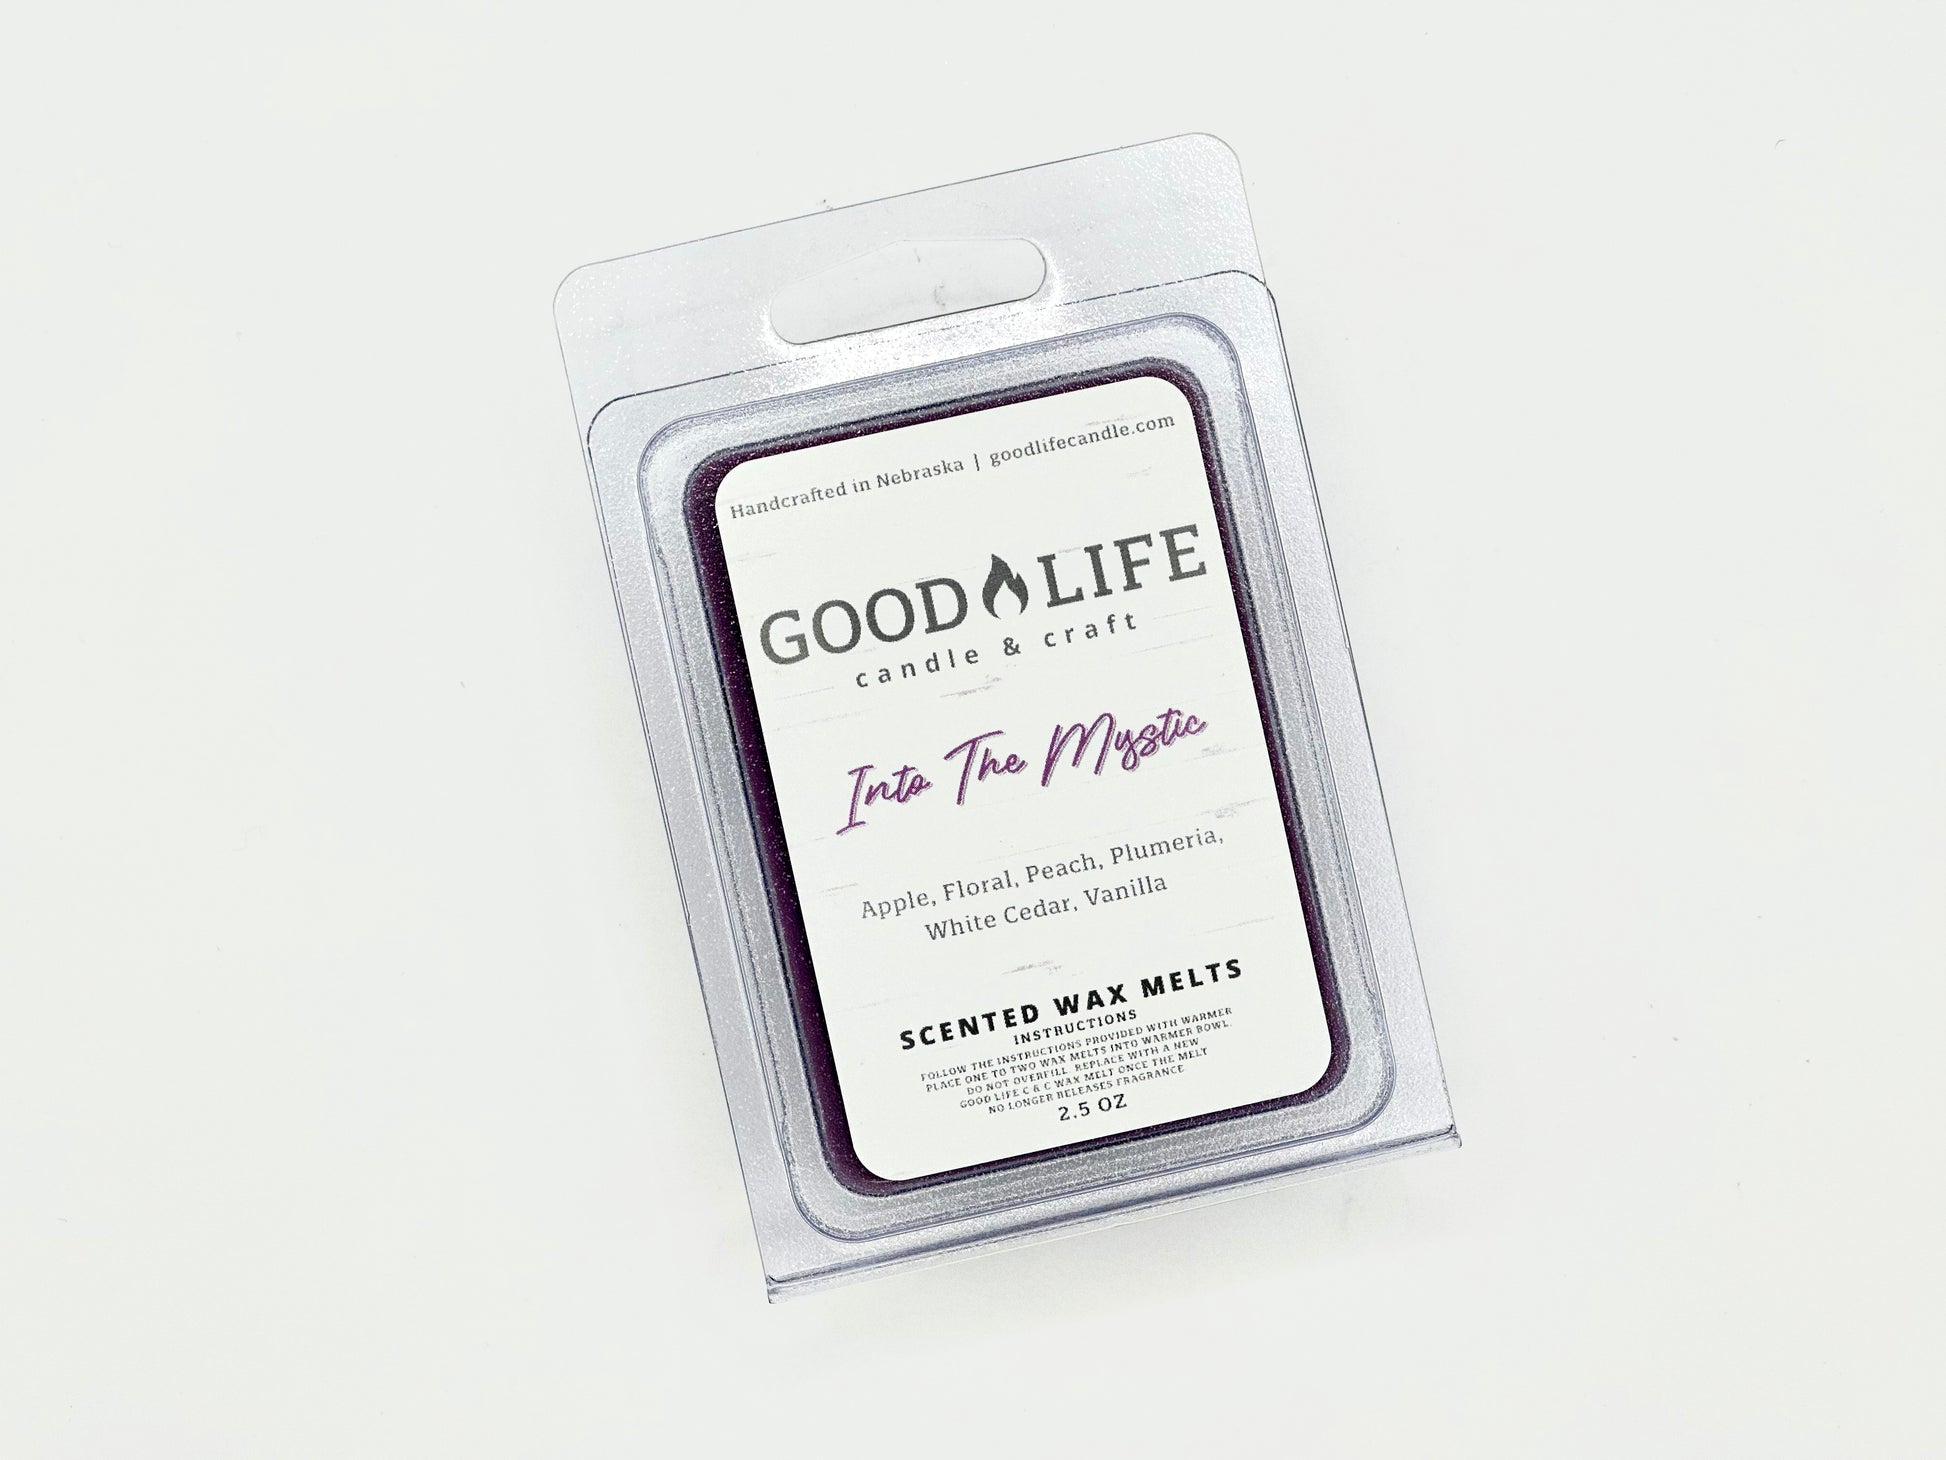 Into The Mystic Scented Wax Melts – Good Life Candle & Craft